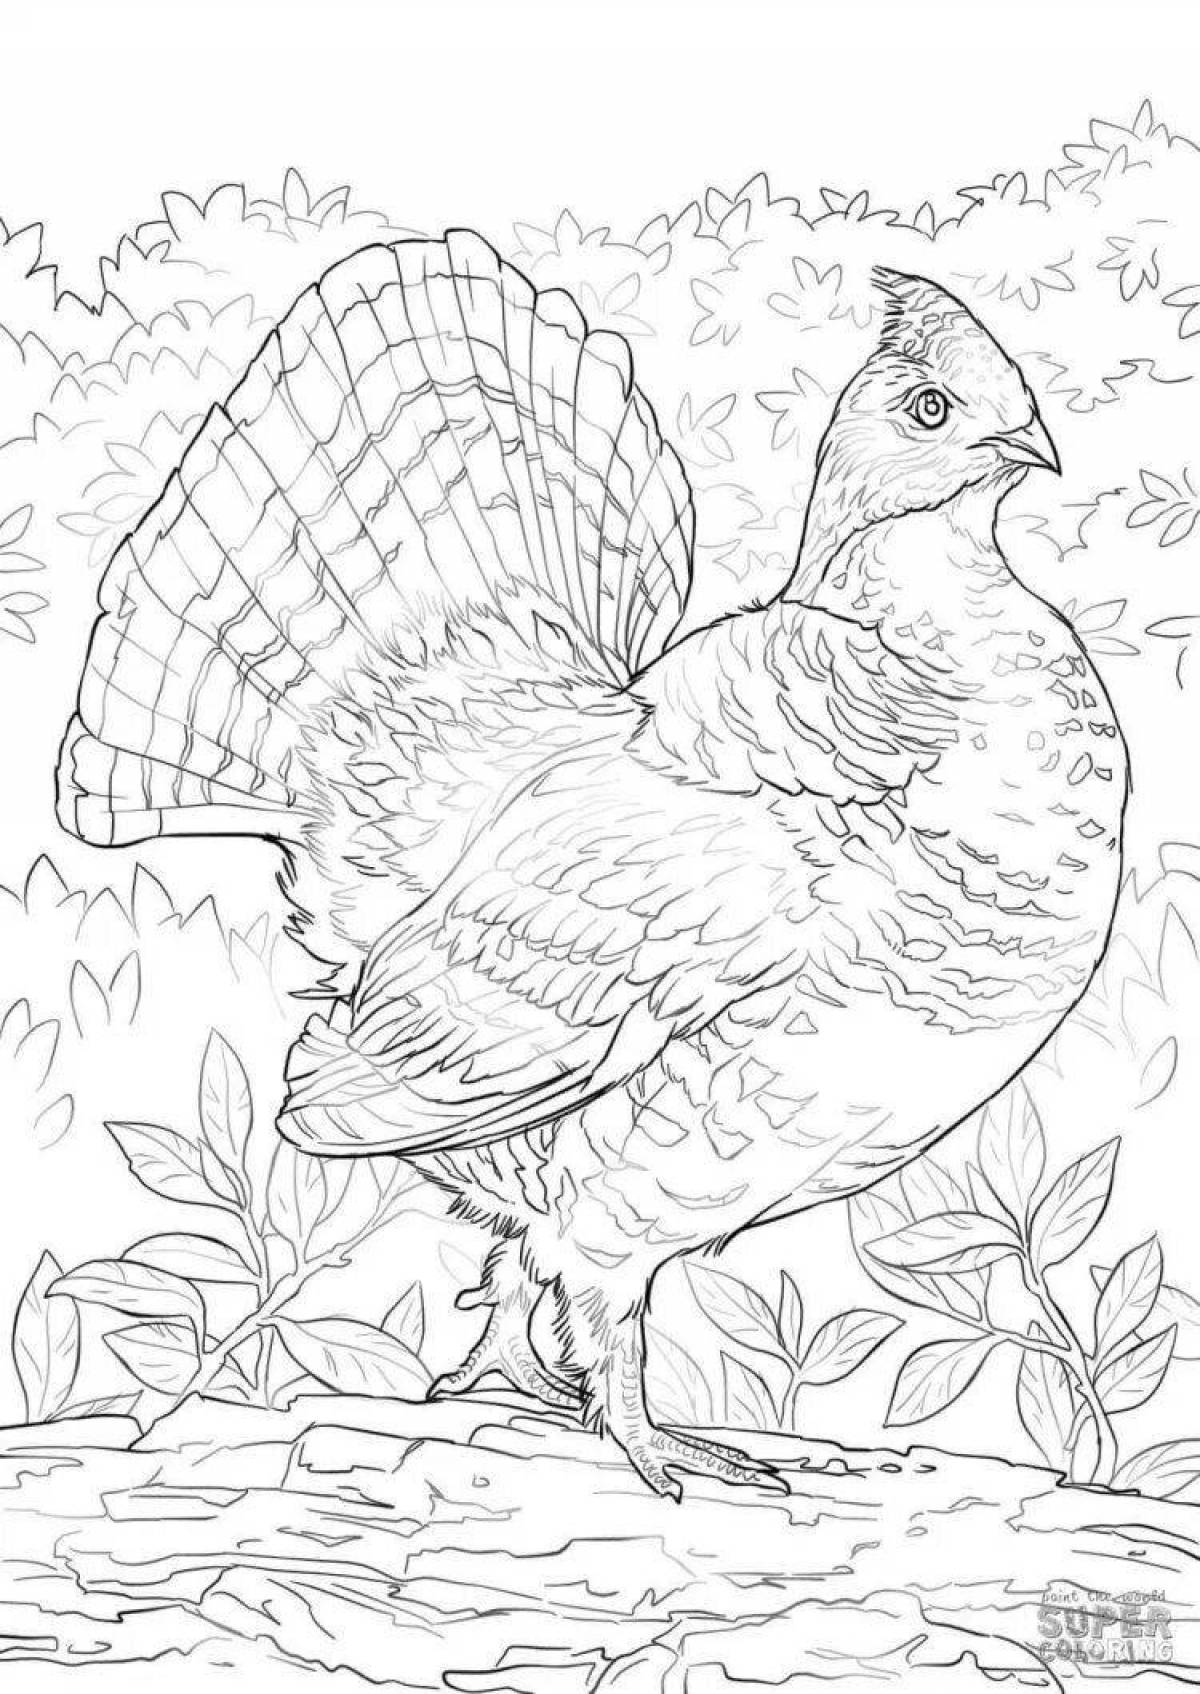 Coloring book happy black grouse